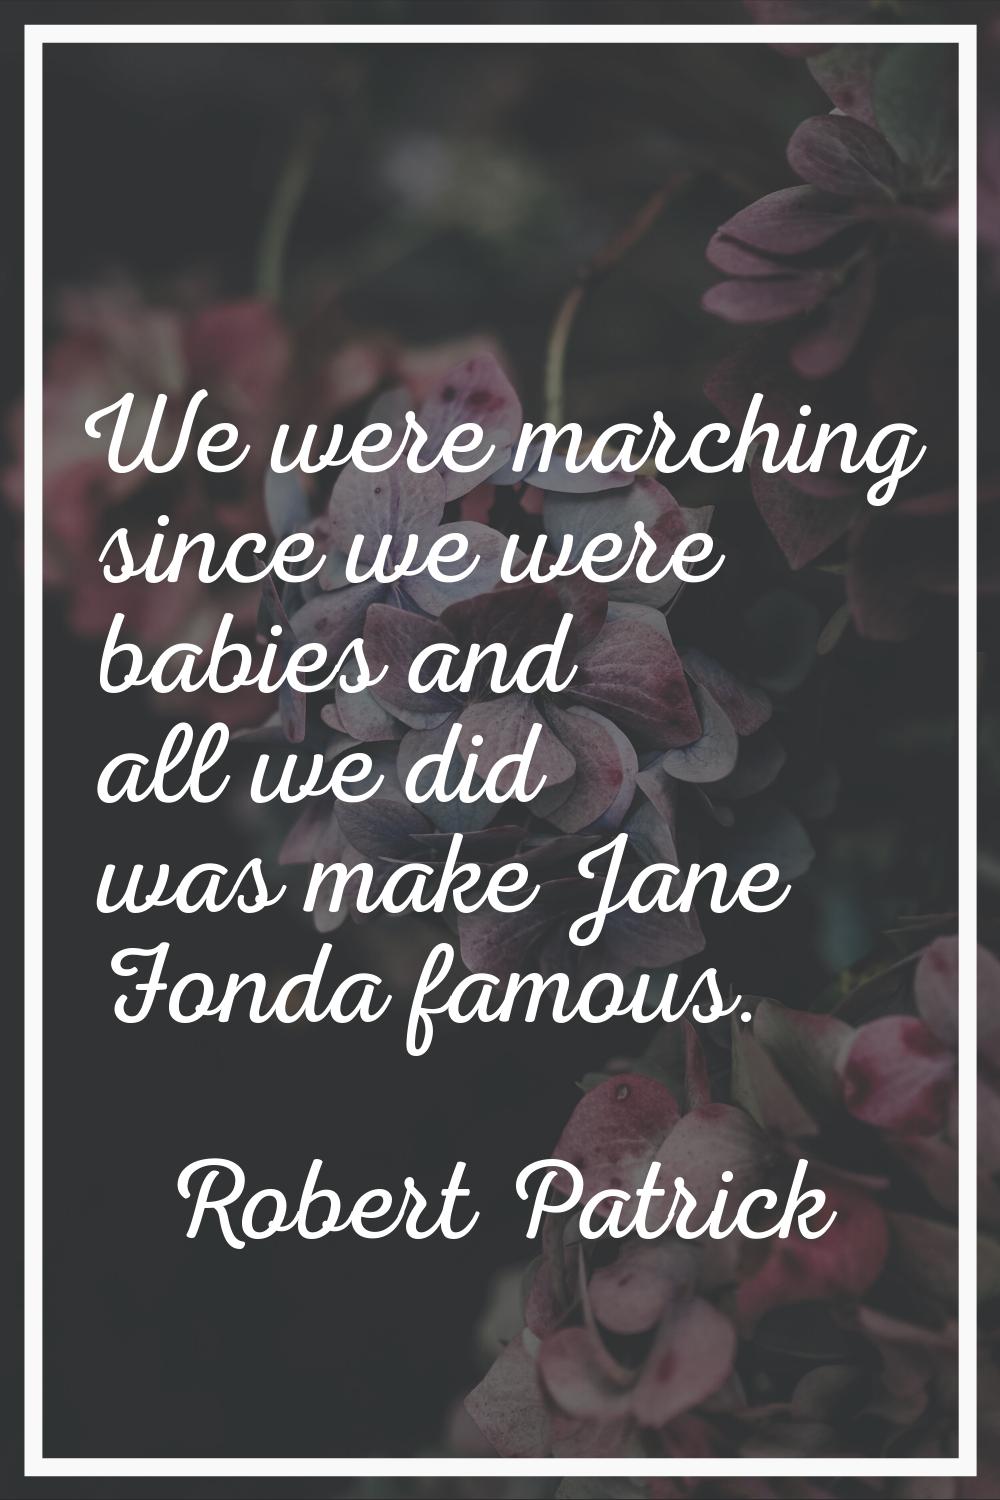 We were marching since we were babies and all we did was make Jane Fonda famous.